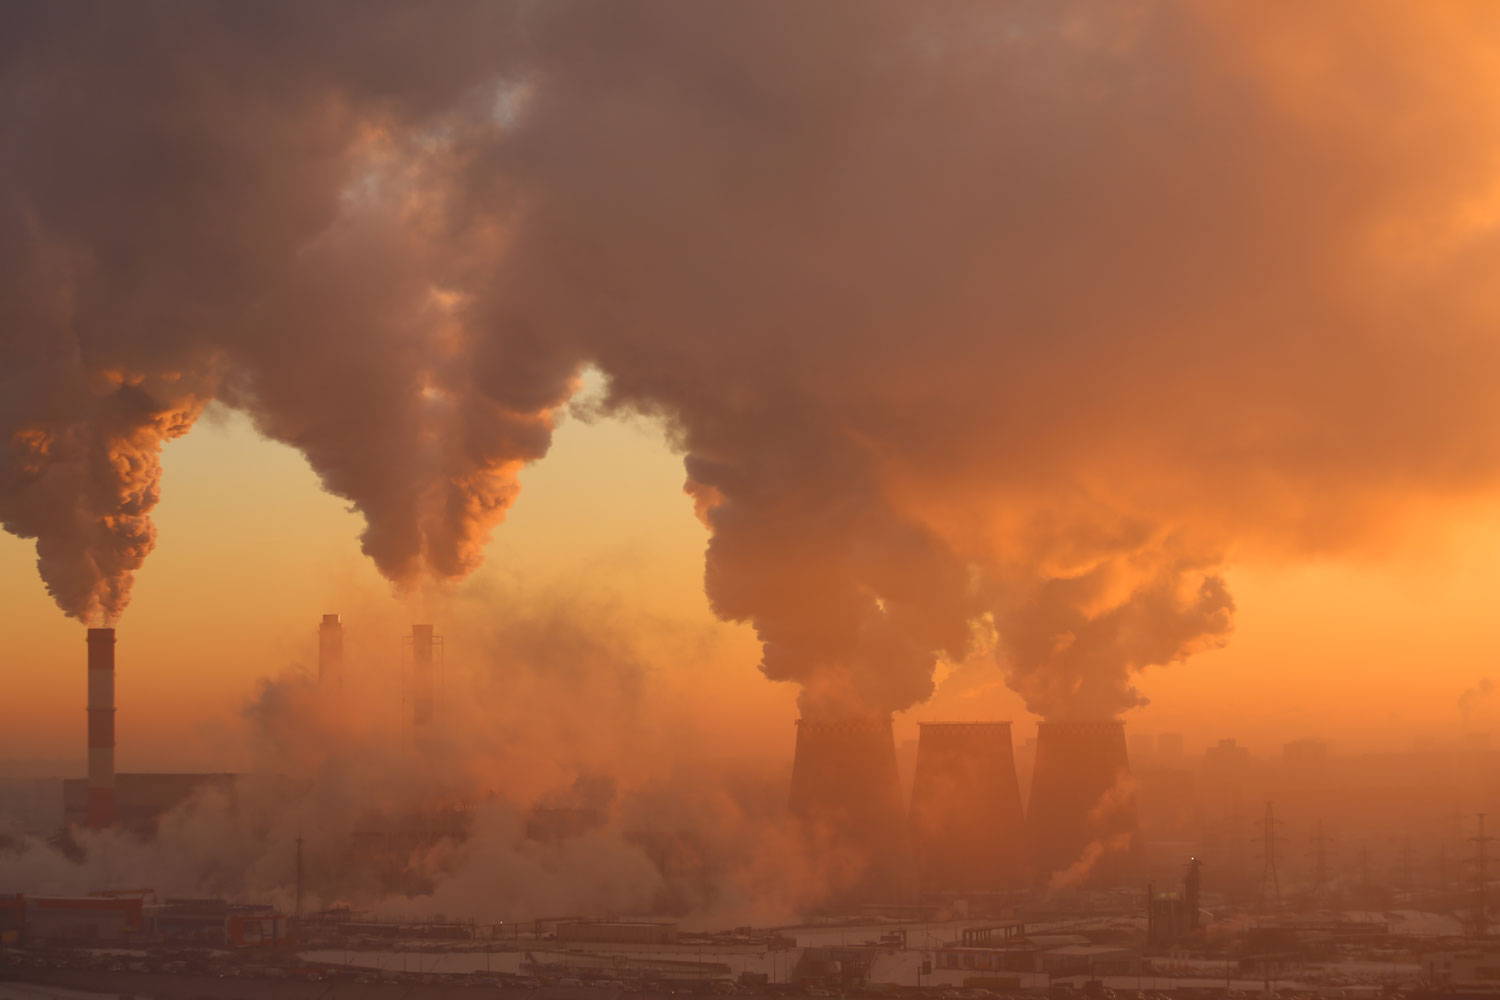 What are the world’s top polluting countries?